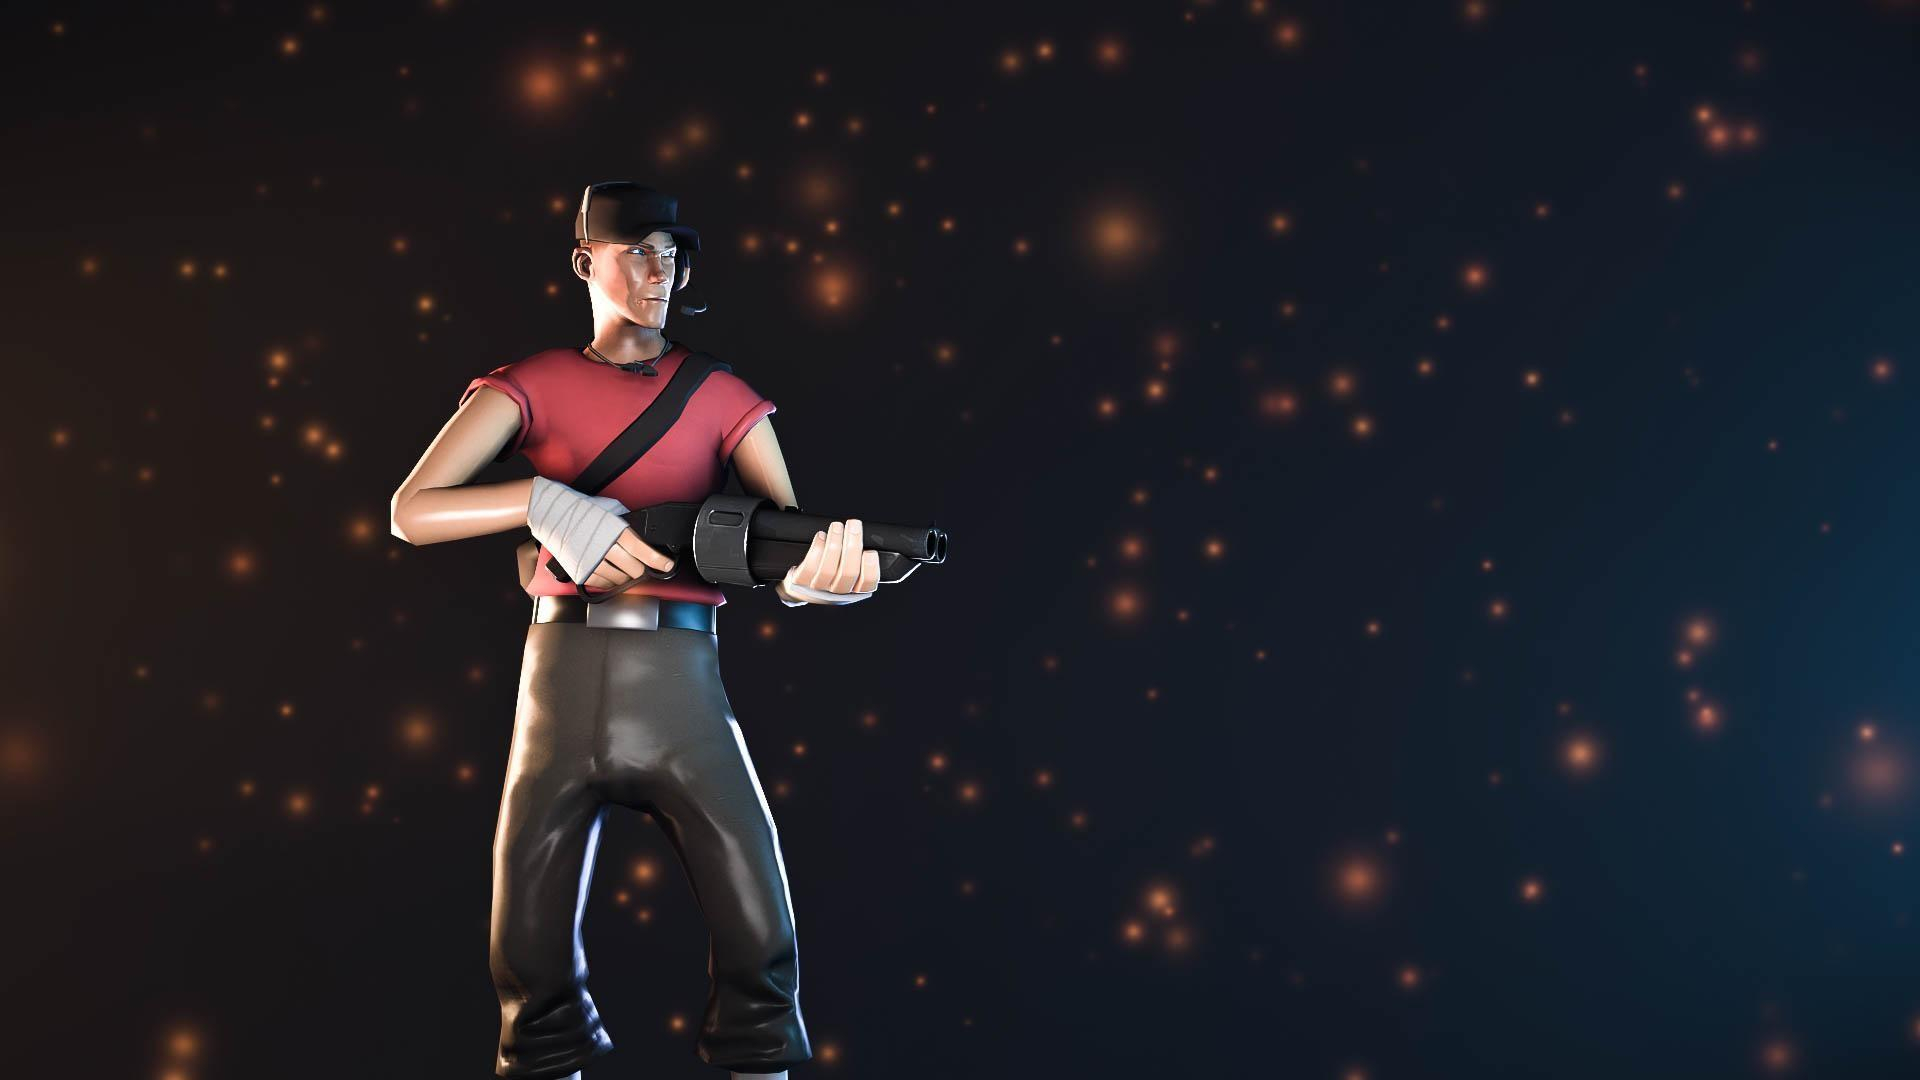 1920x1080 Scout Team Fortress 2 Wallpapers